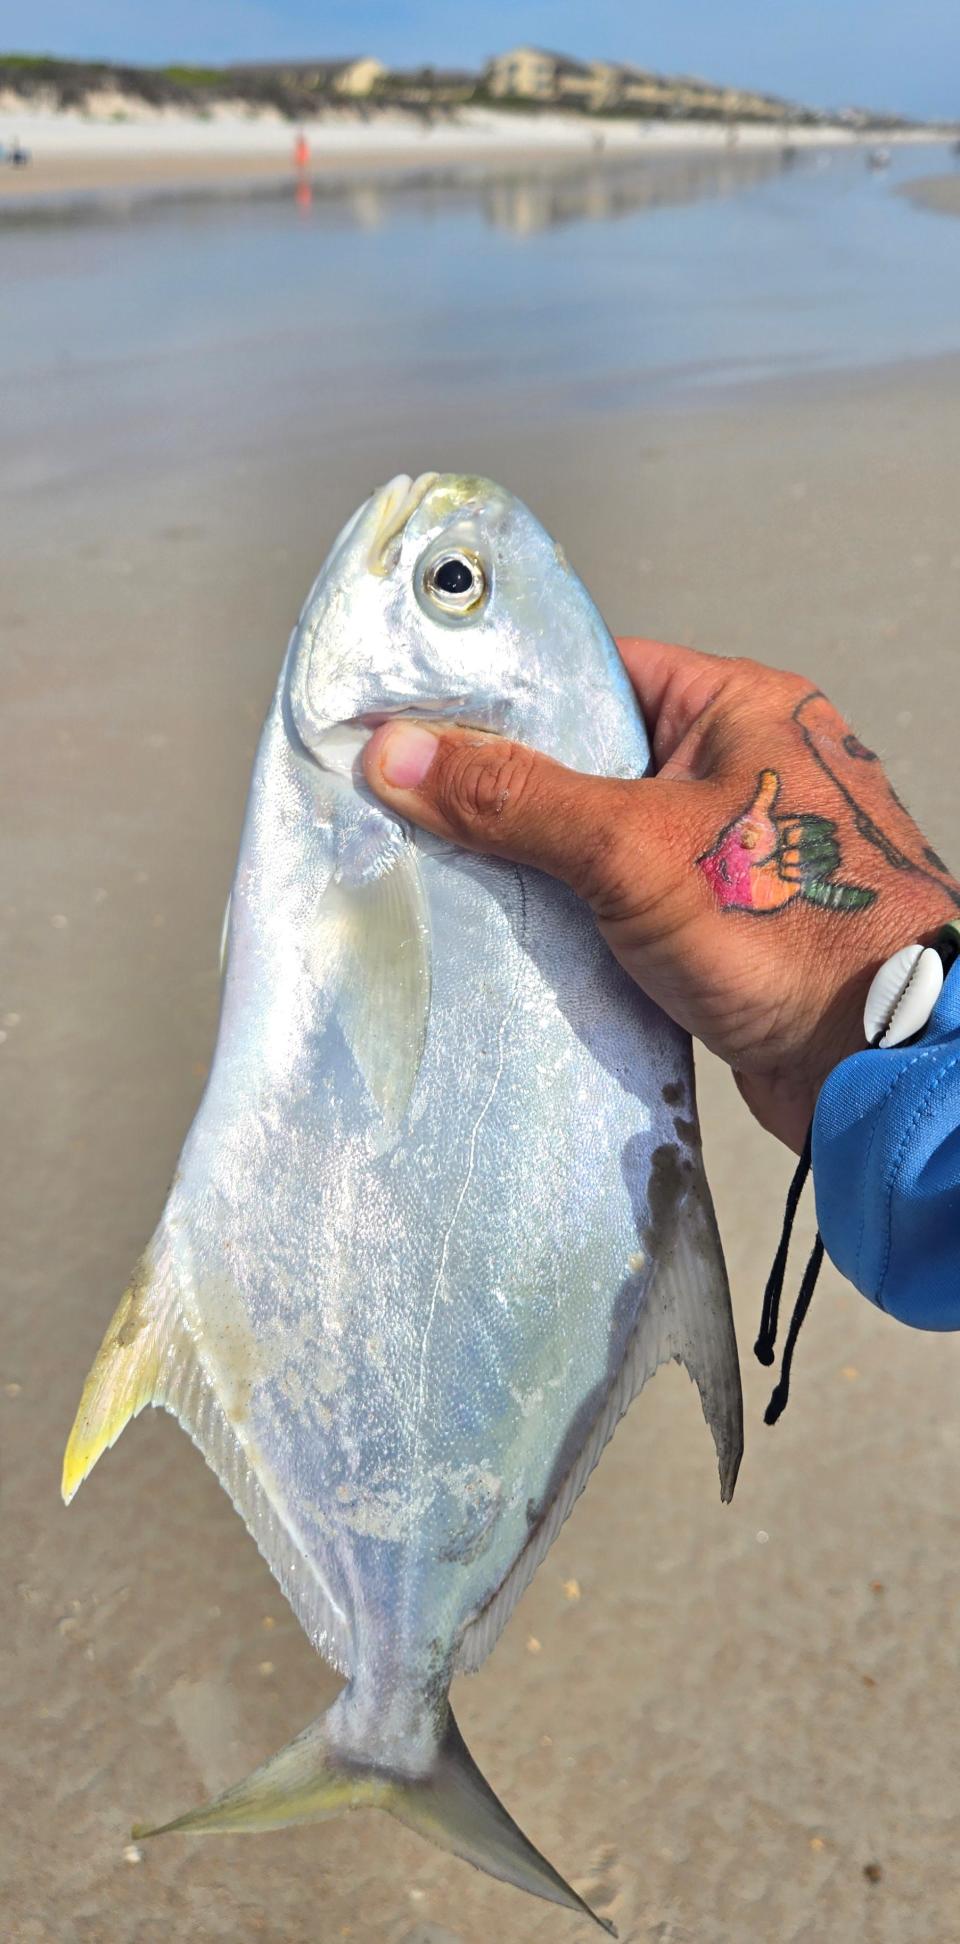 Chris Mansfield's fruitful day of surf-fishing included some pompano.